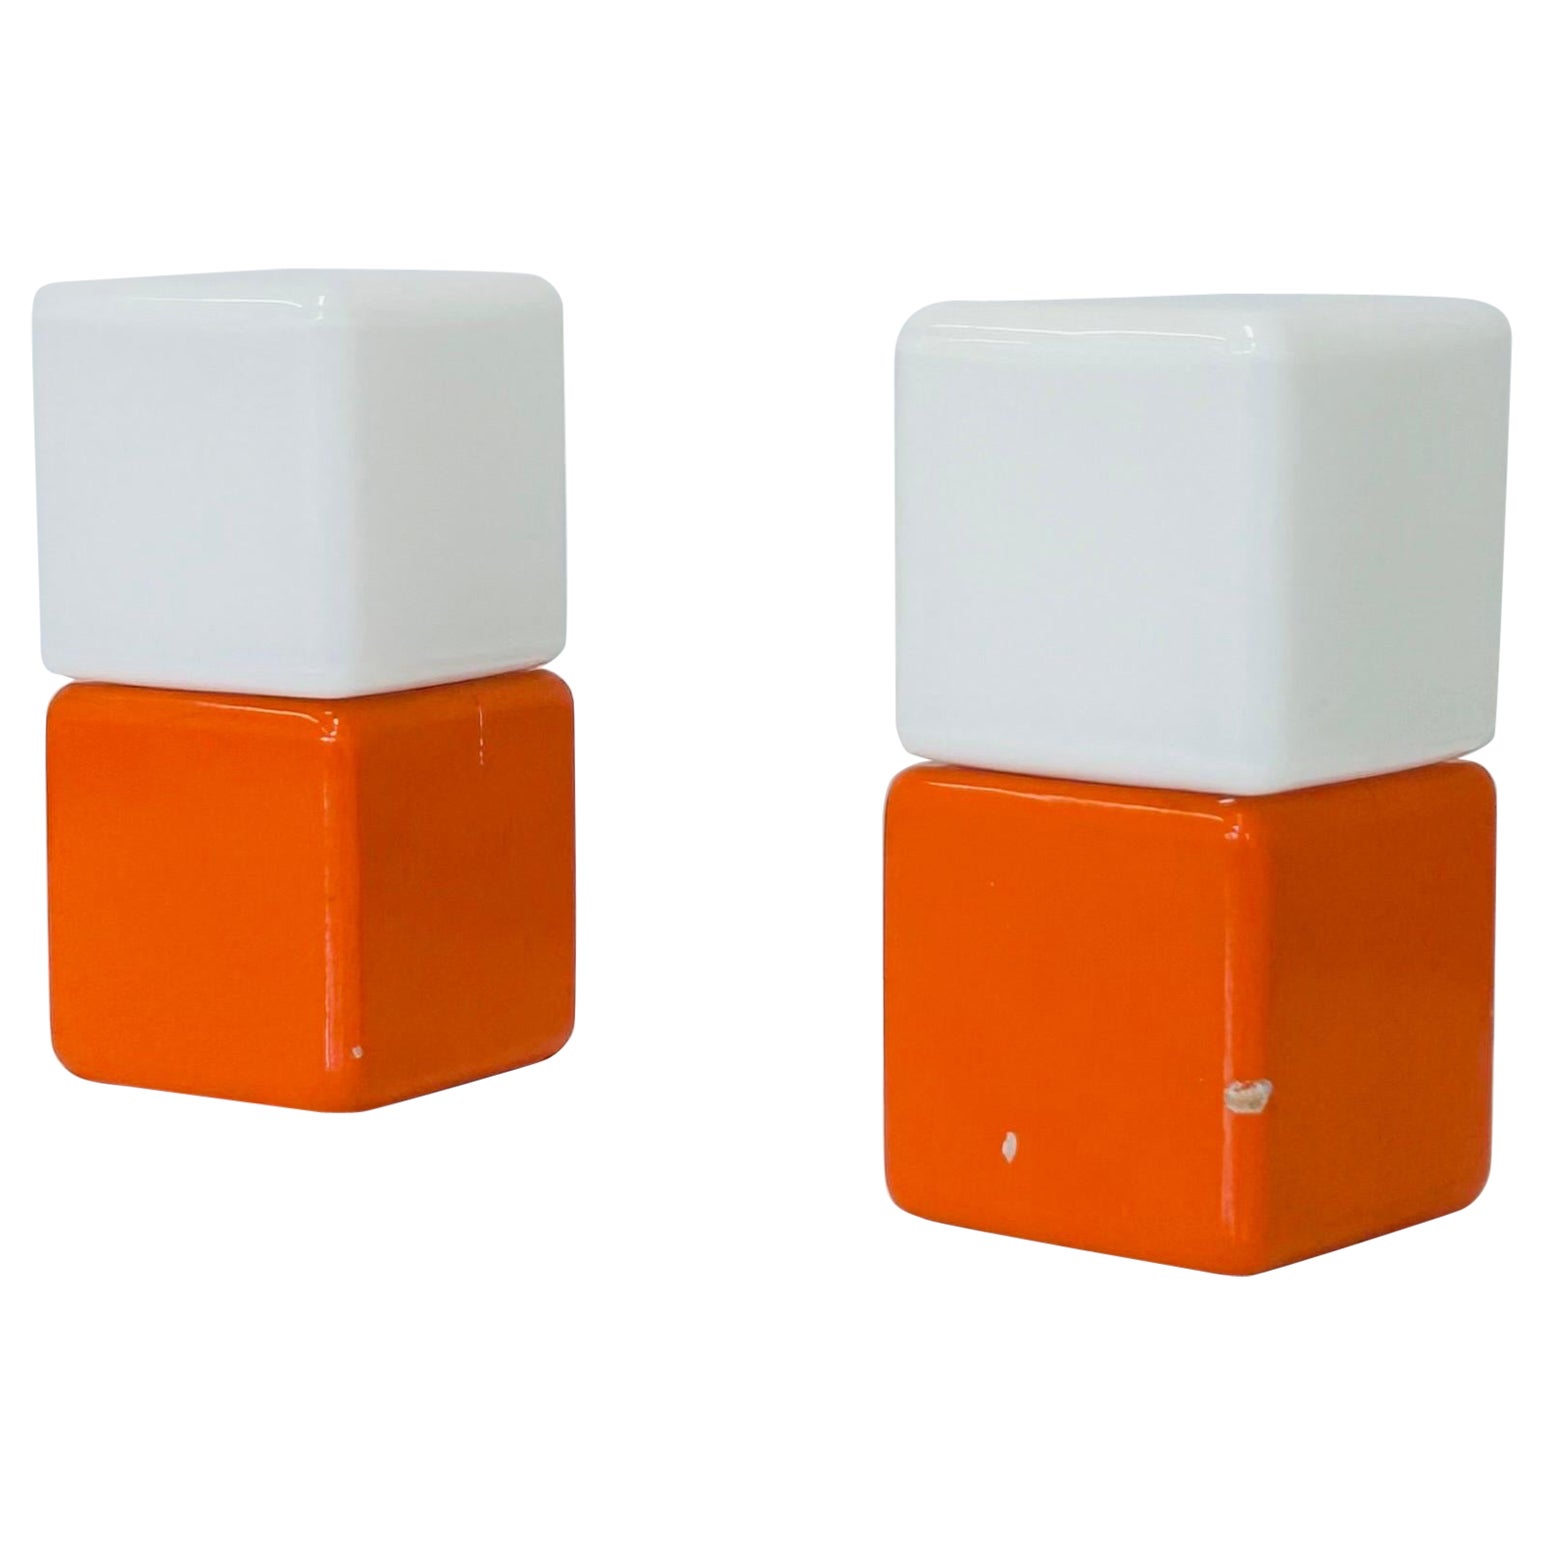 A pair of rare night lamps, designed by the renowned Danish lighting designer Svend Aage Holm Sørensen in the early 1960s. The lamps are model 4151 and were produced by Holm Sørensen & Co. They feature orange wood bases and white glass shades in a